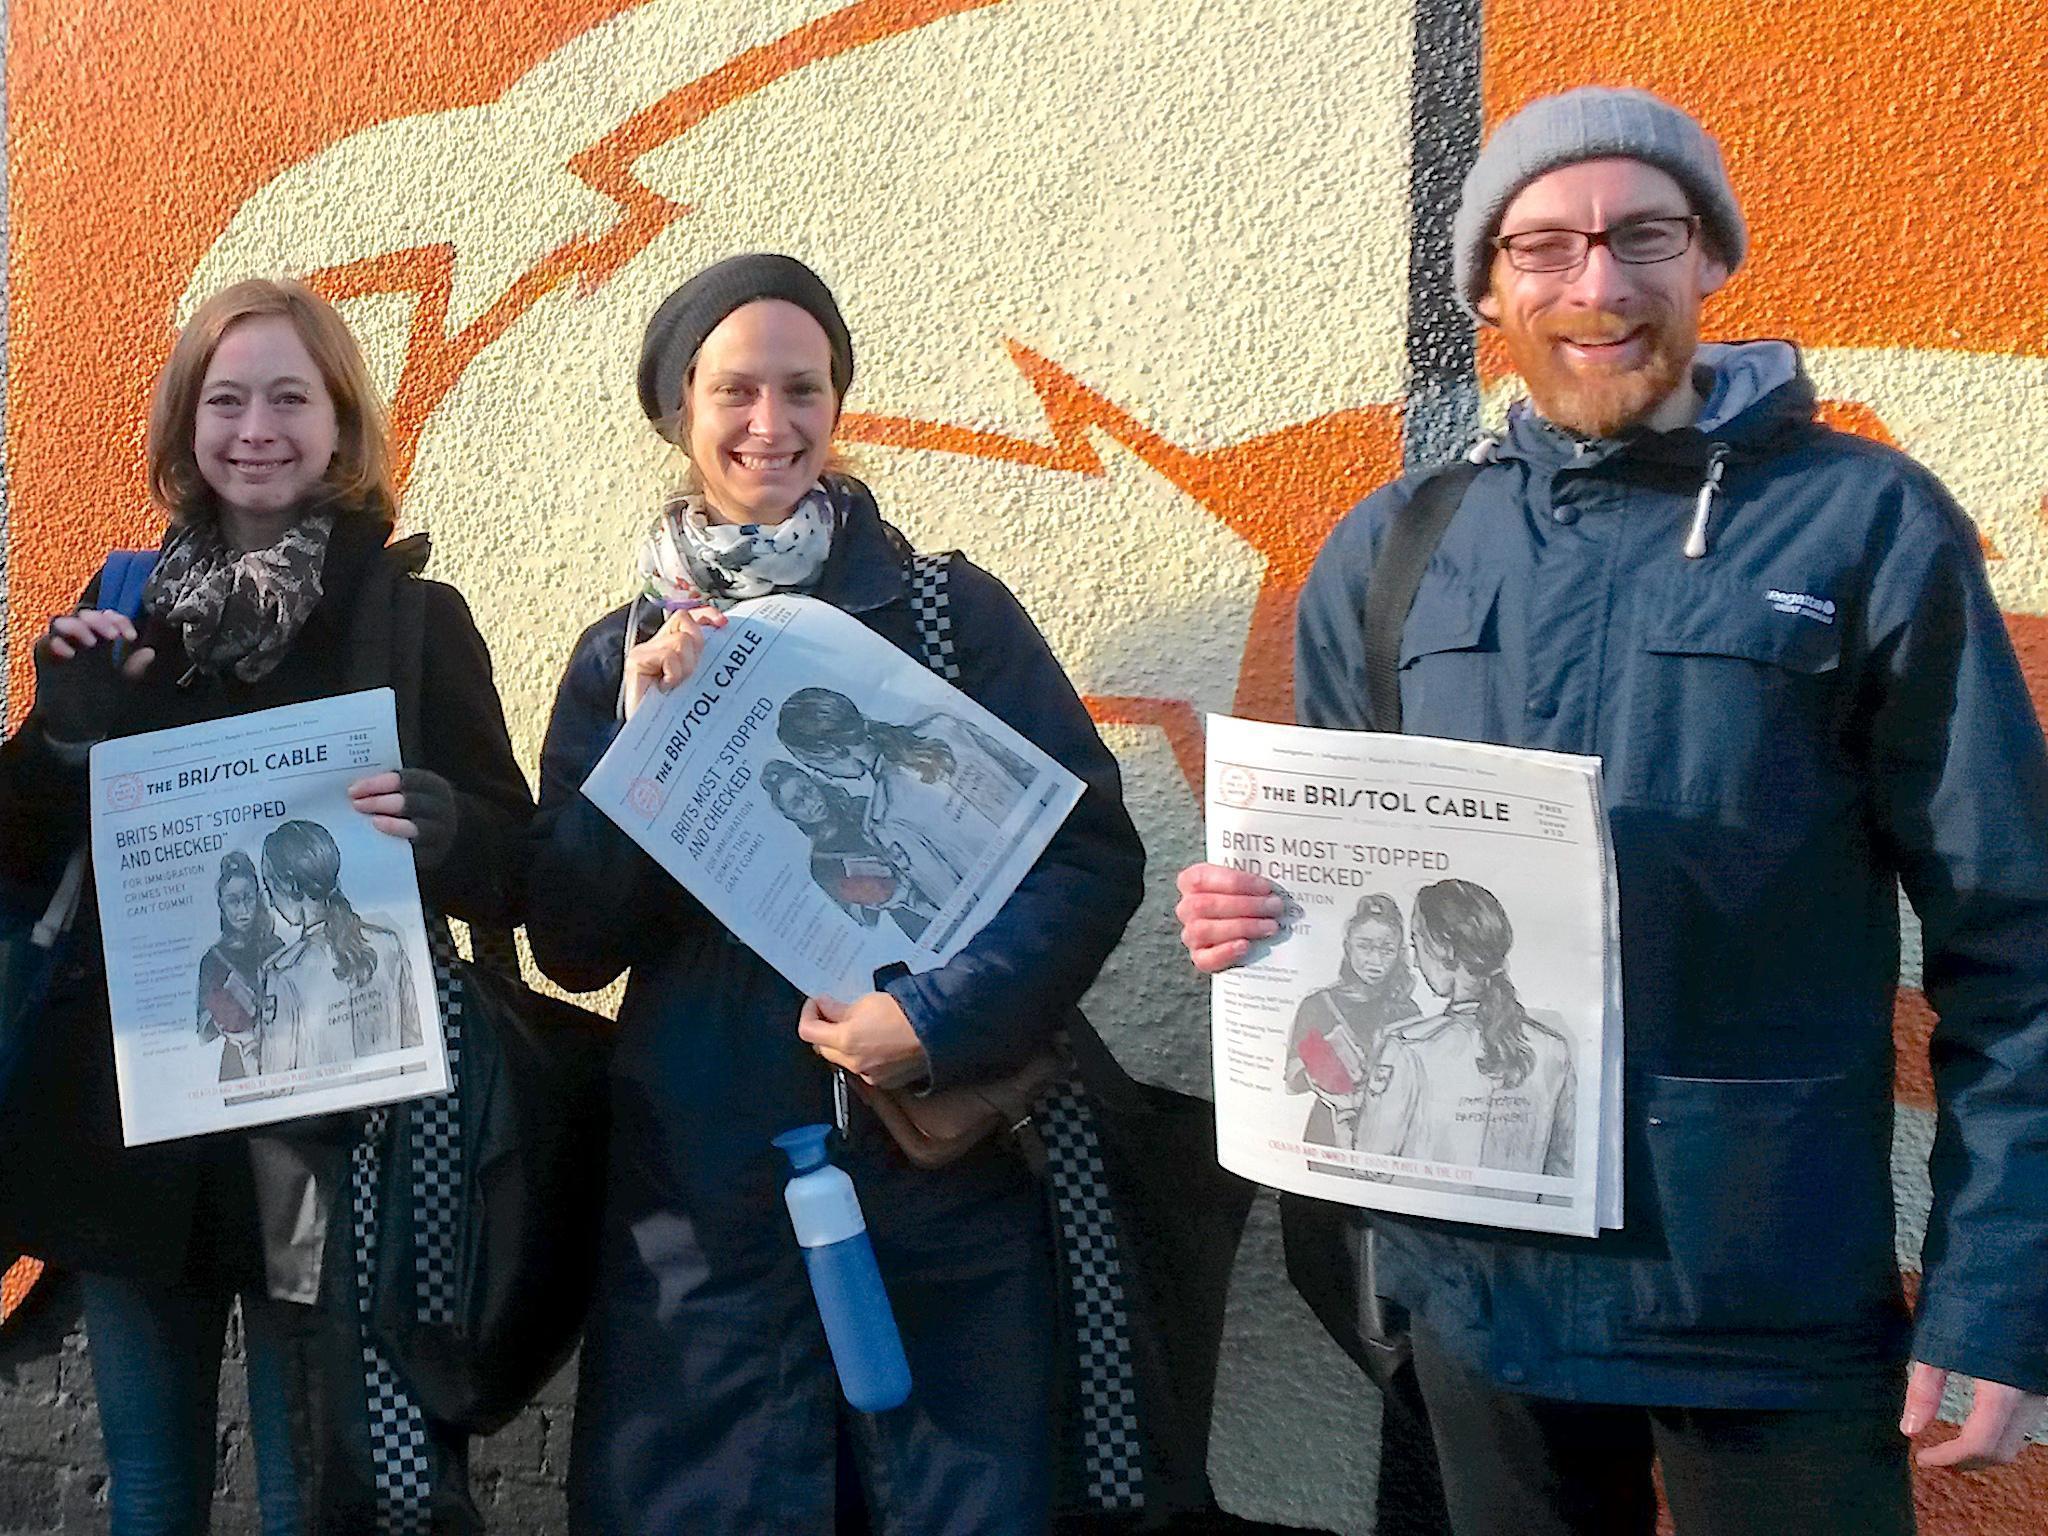 Bristol Cable members distribute an issue of the paper featuring an investigation into immigration checks